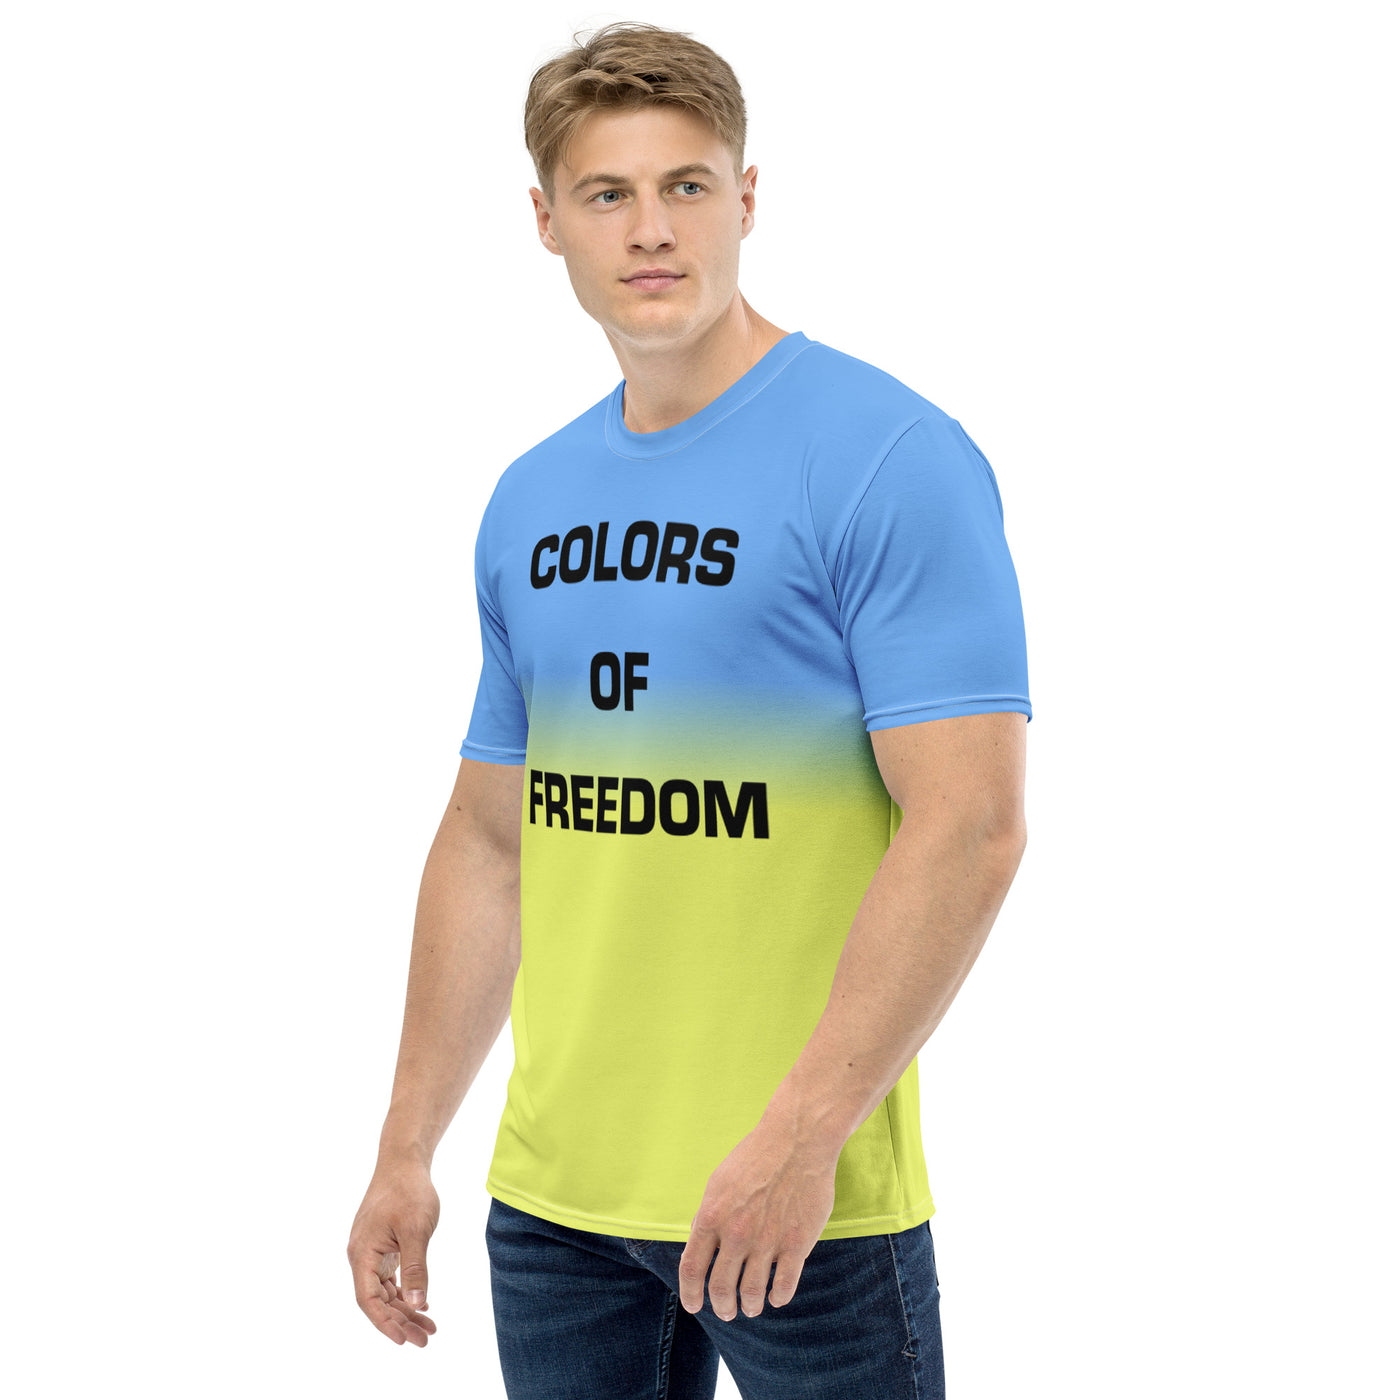 Colors of Freedom T-shirt Print